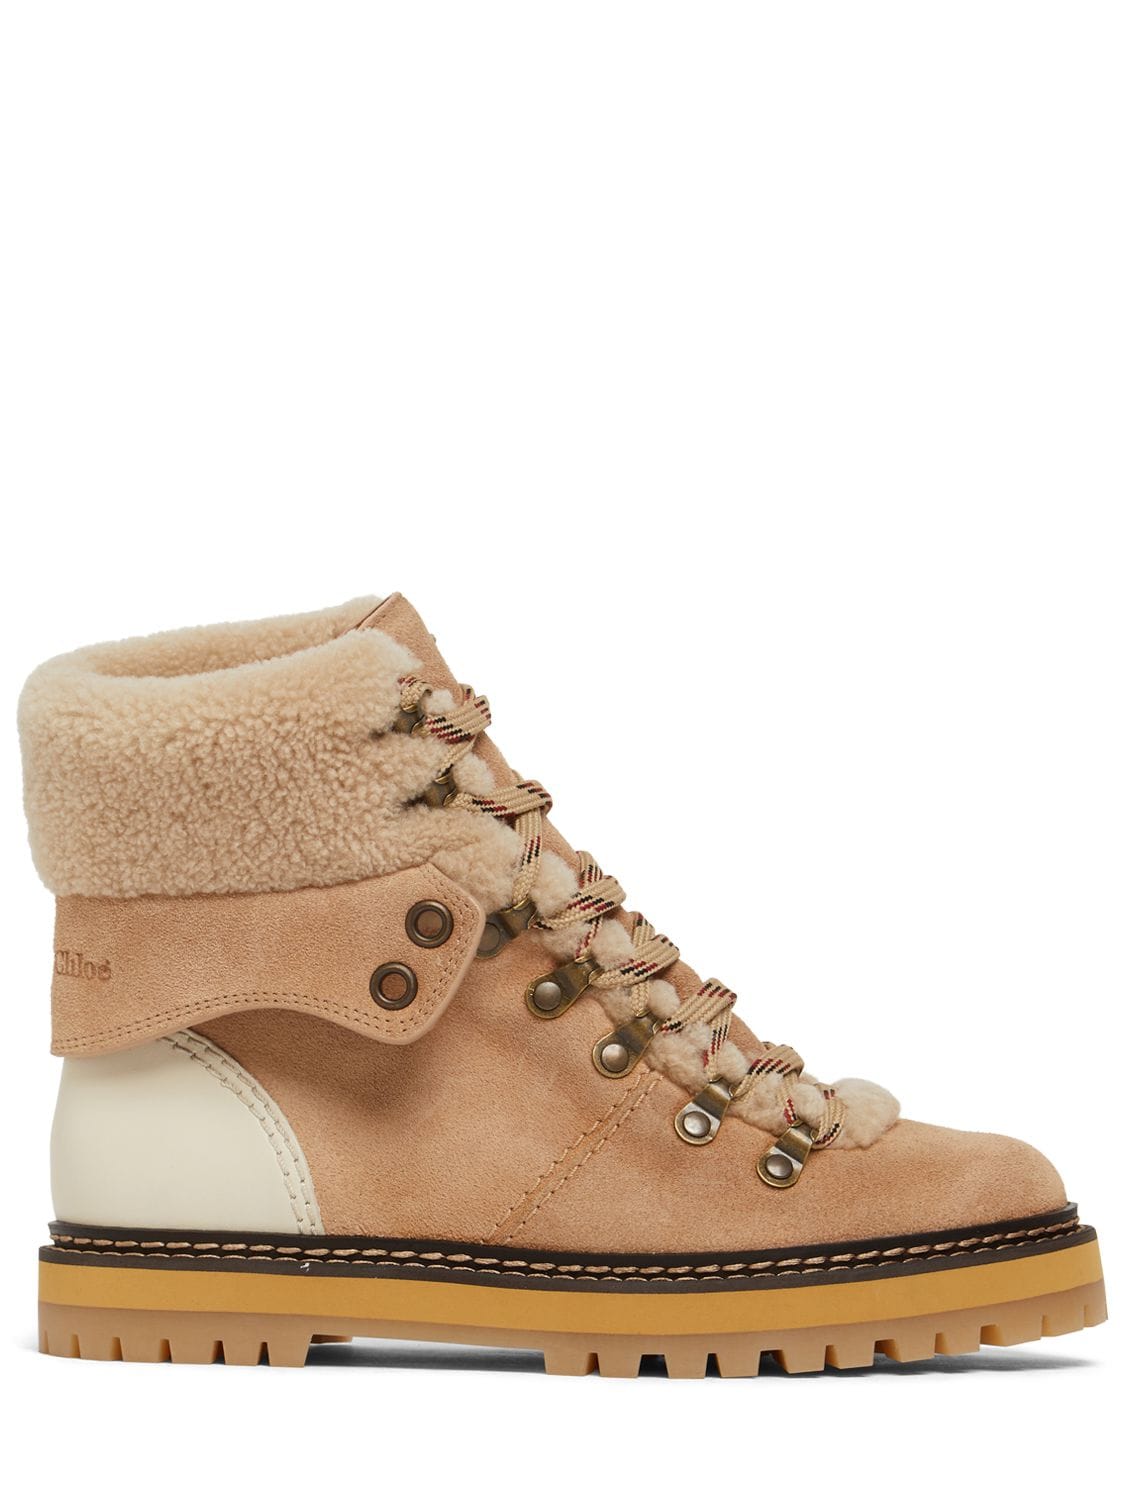 SEE BY CHLOÉ 25MM EILEEN SHEARLING HIKING BOOTS